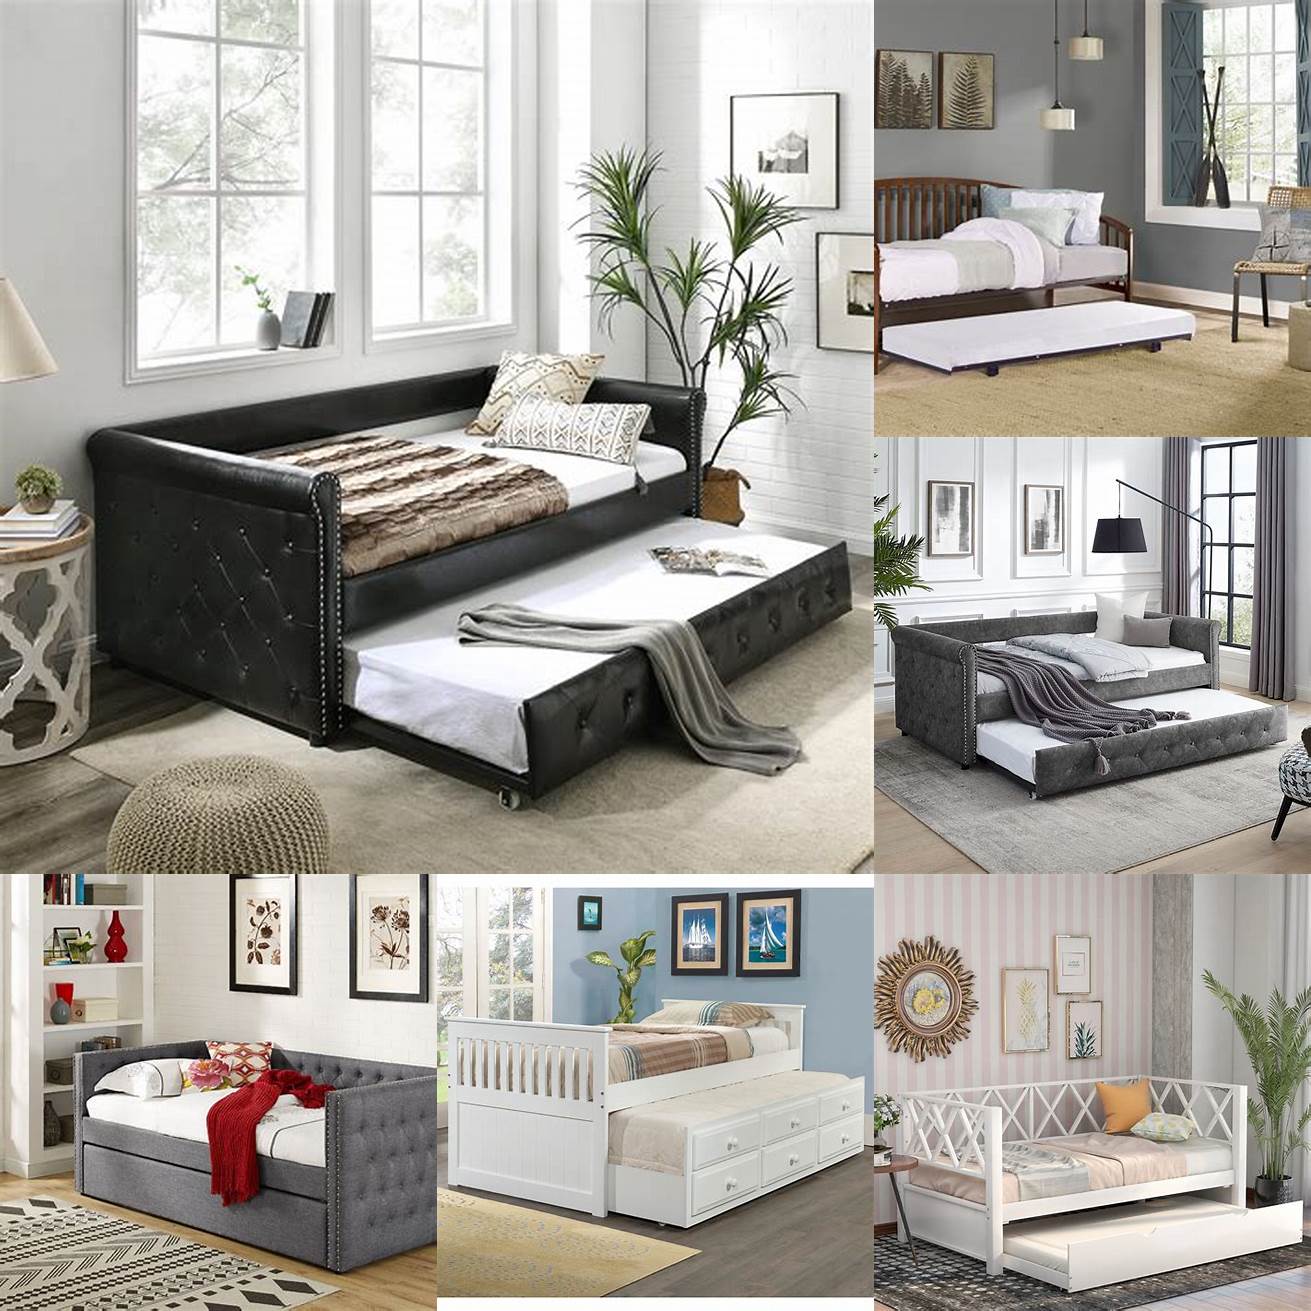 Multi-functional Depending on the bed frame design twin beds with trundle can also serve as a sofa or a daybed during the day This feature makes them a versatile option for small apartments or living rooms